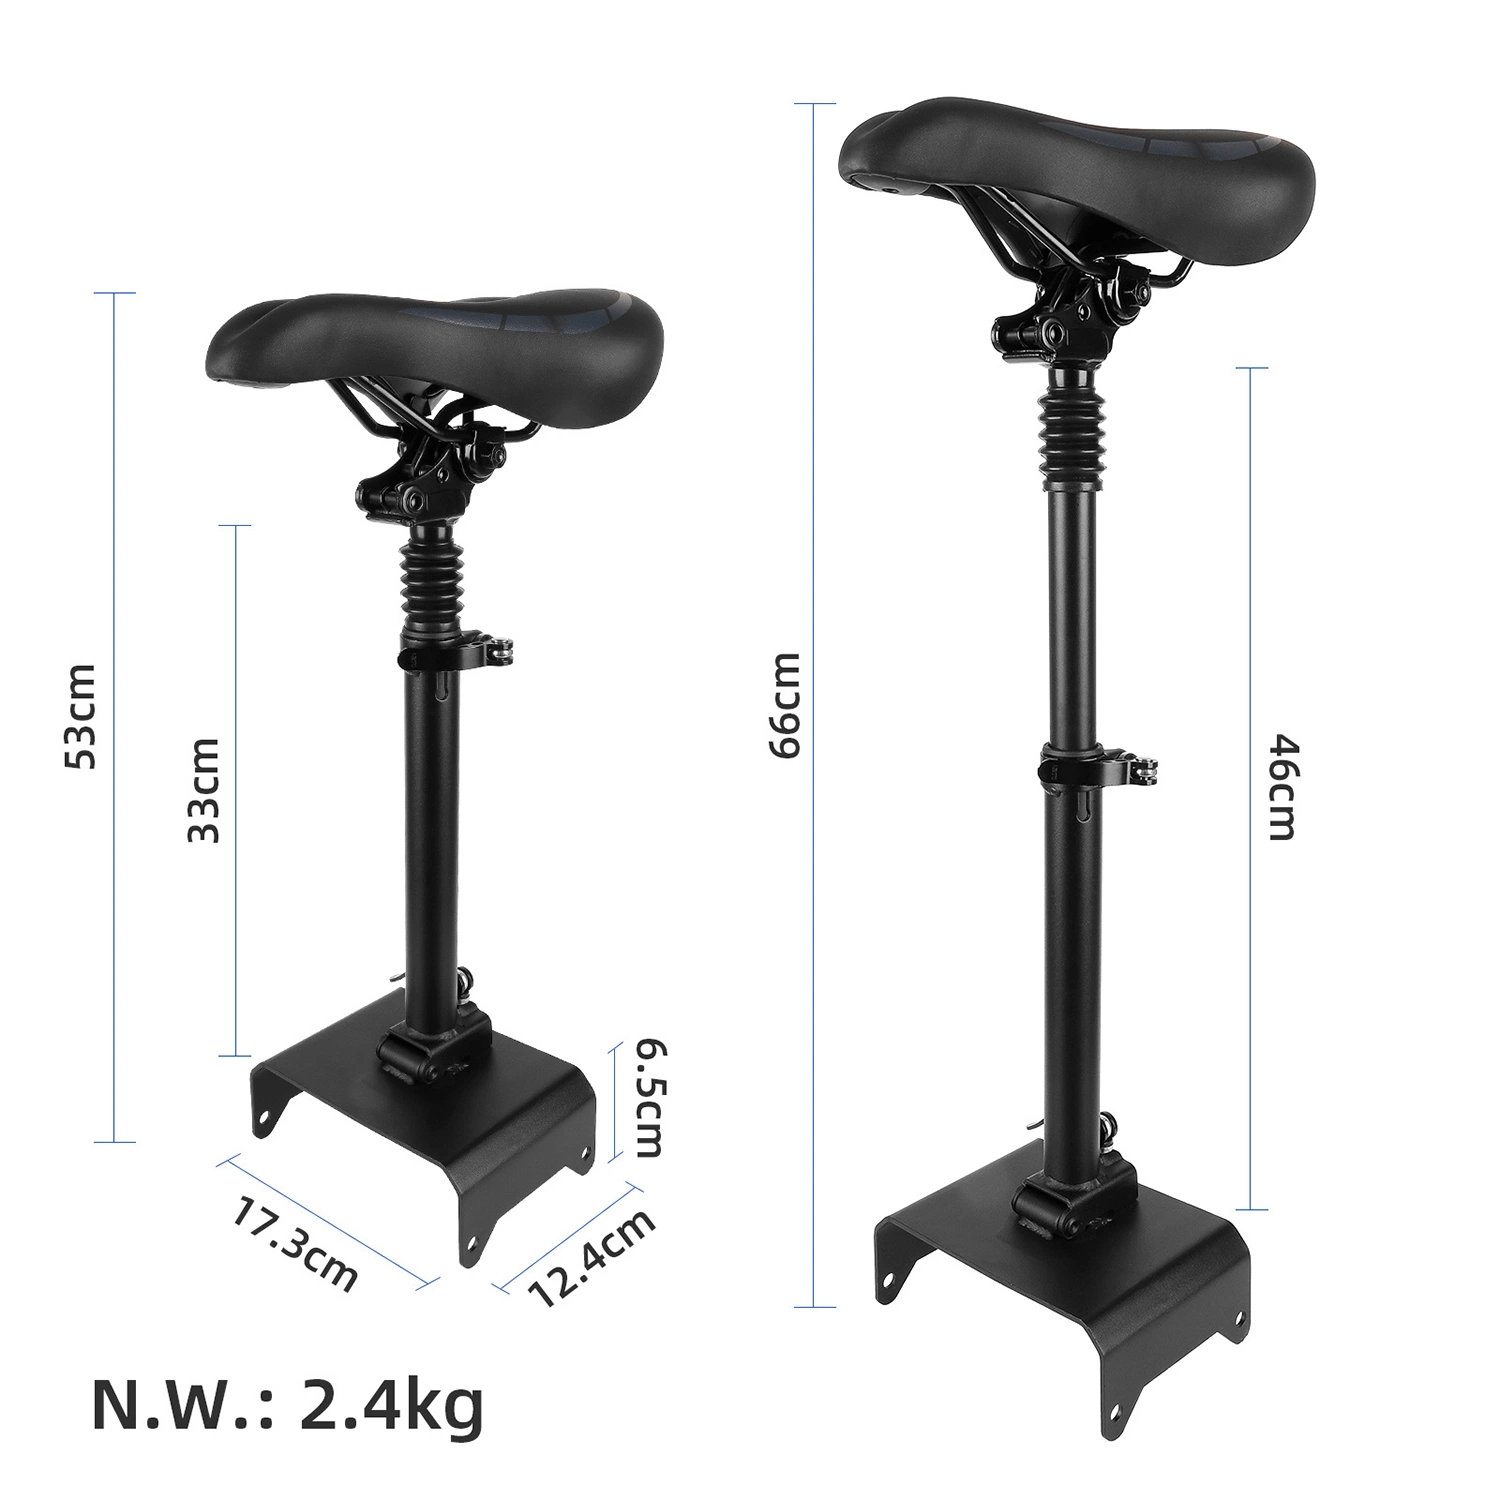 Shock Absorbing Seat Folding Saddle Accessories for Ninebot F20 F25 F30 F40 Electric Scooter